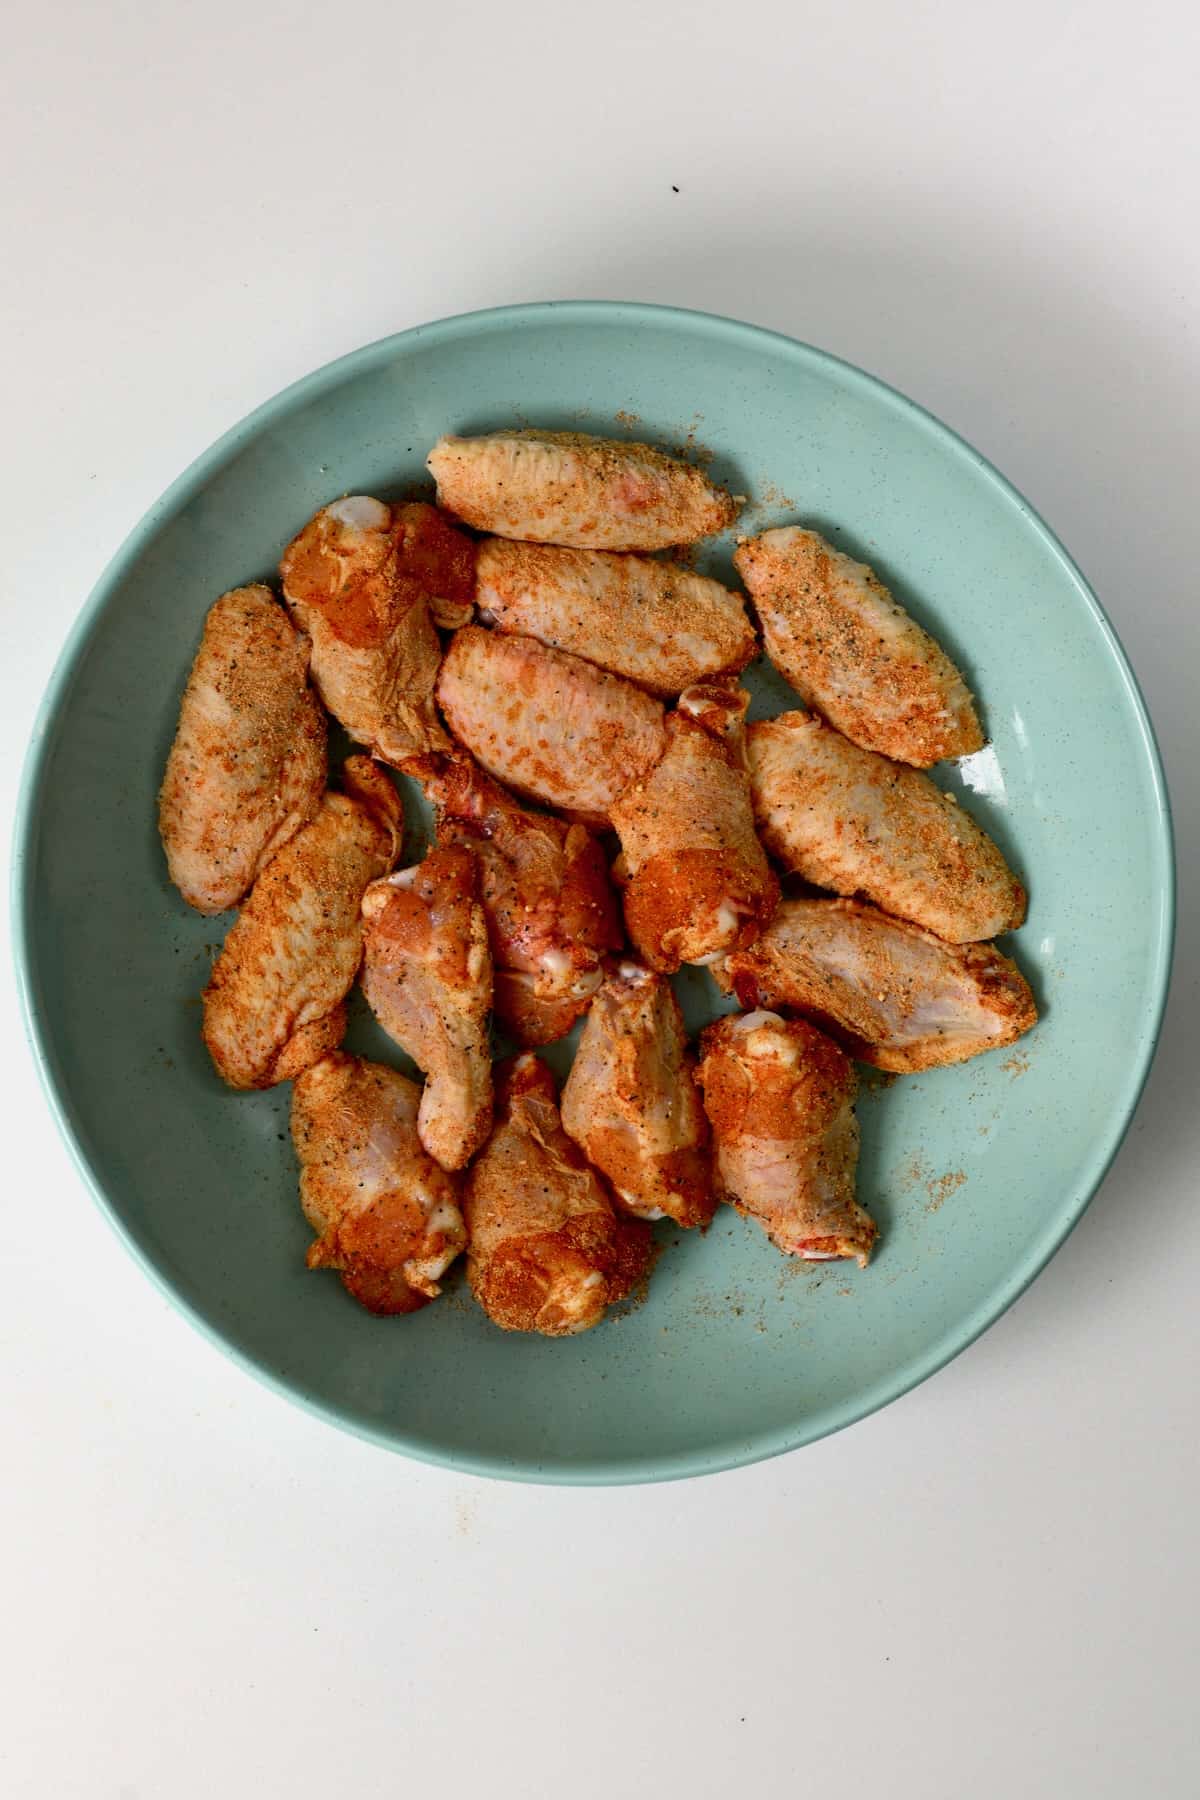 Chicken wings rubbed with chicken seasoning